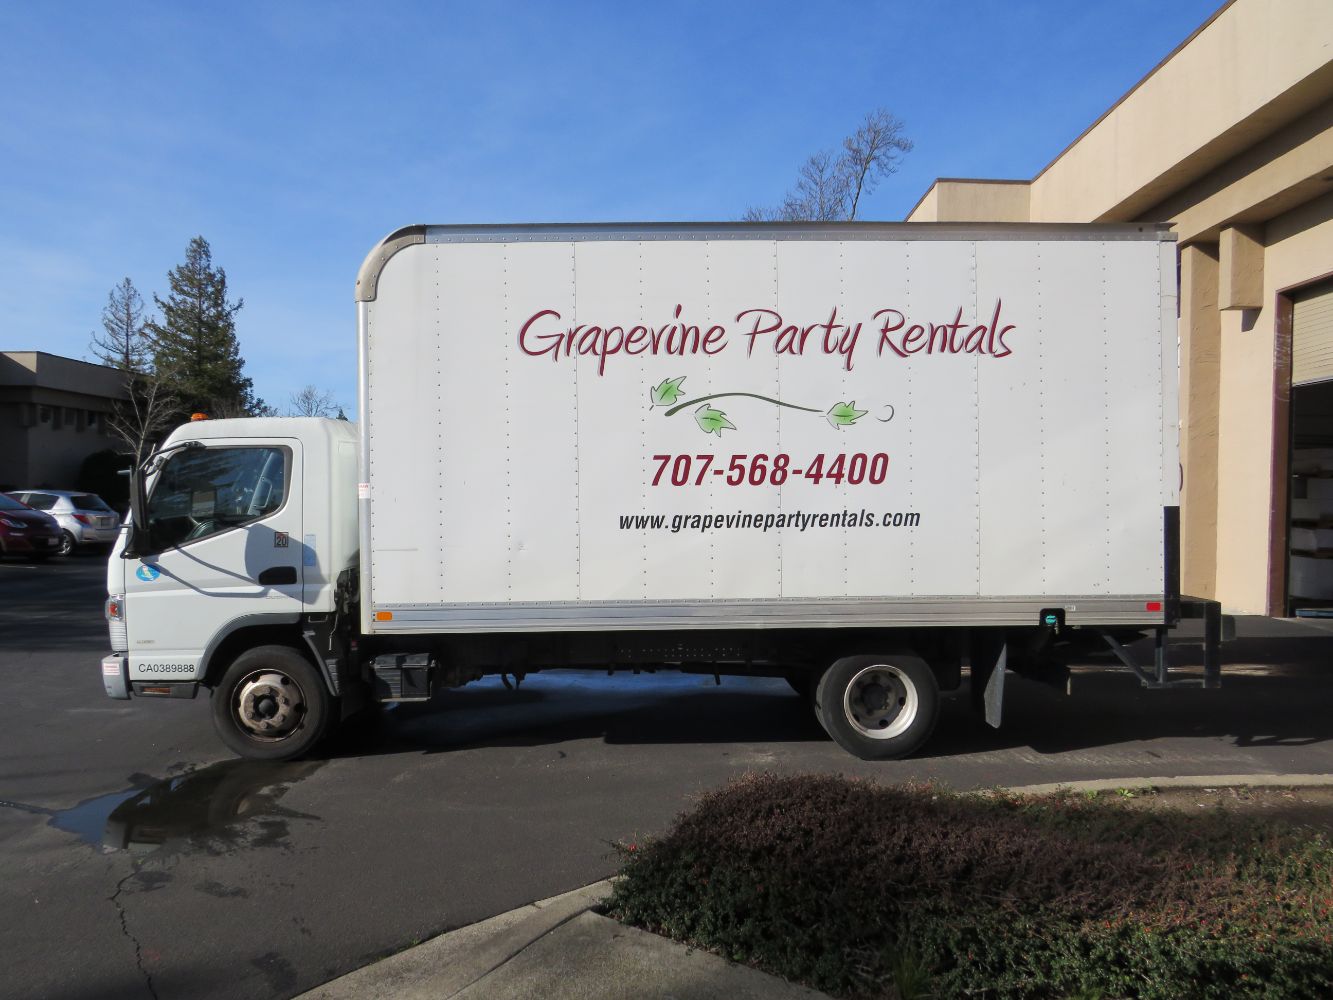 Party & Event Rental Company Closed! Everything must be sold!